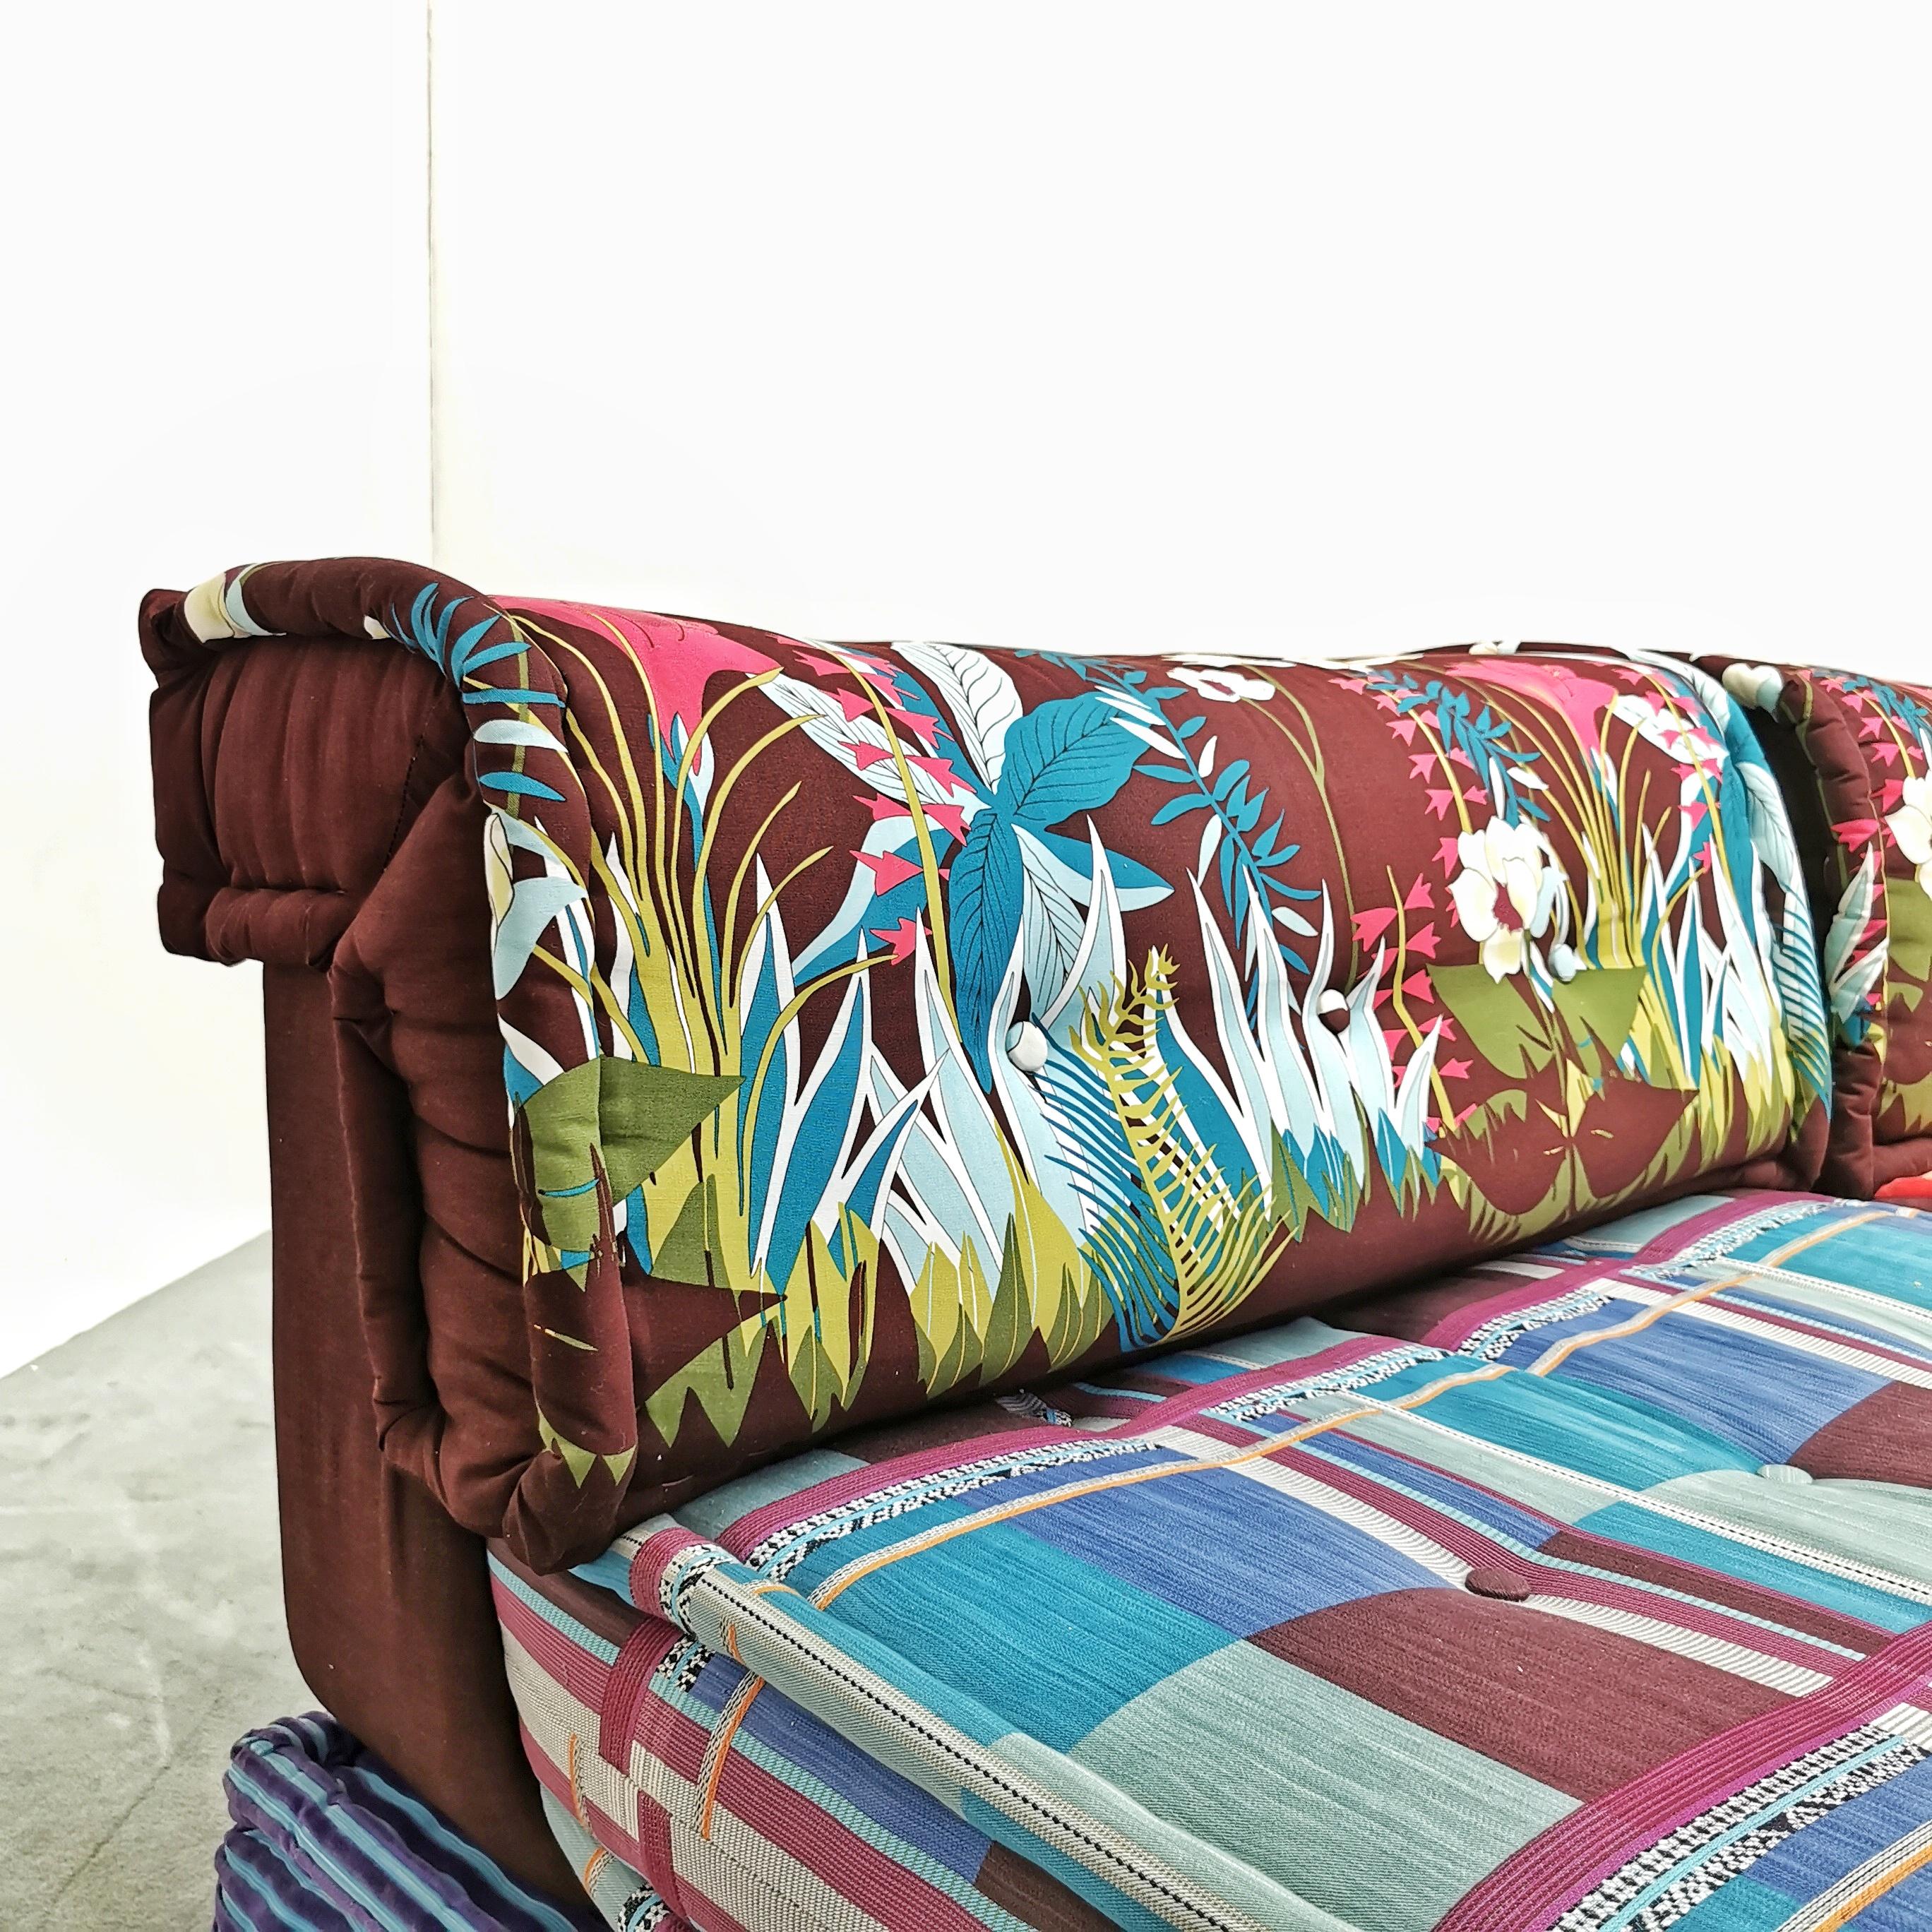 Quilted Roche Bobois Mah Jong sofa Kenzo and Missoni fabrics For Sale